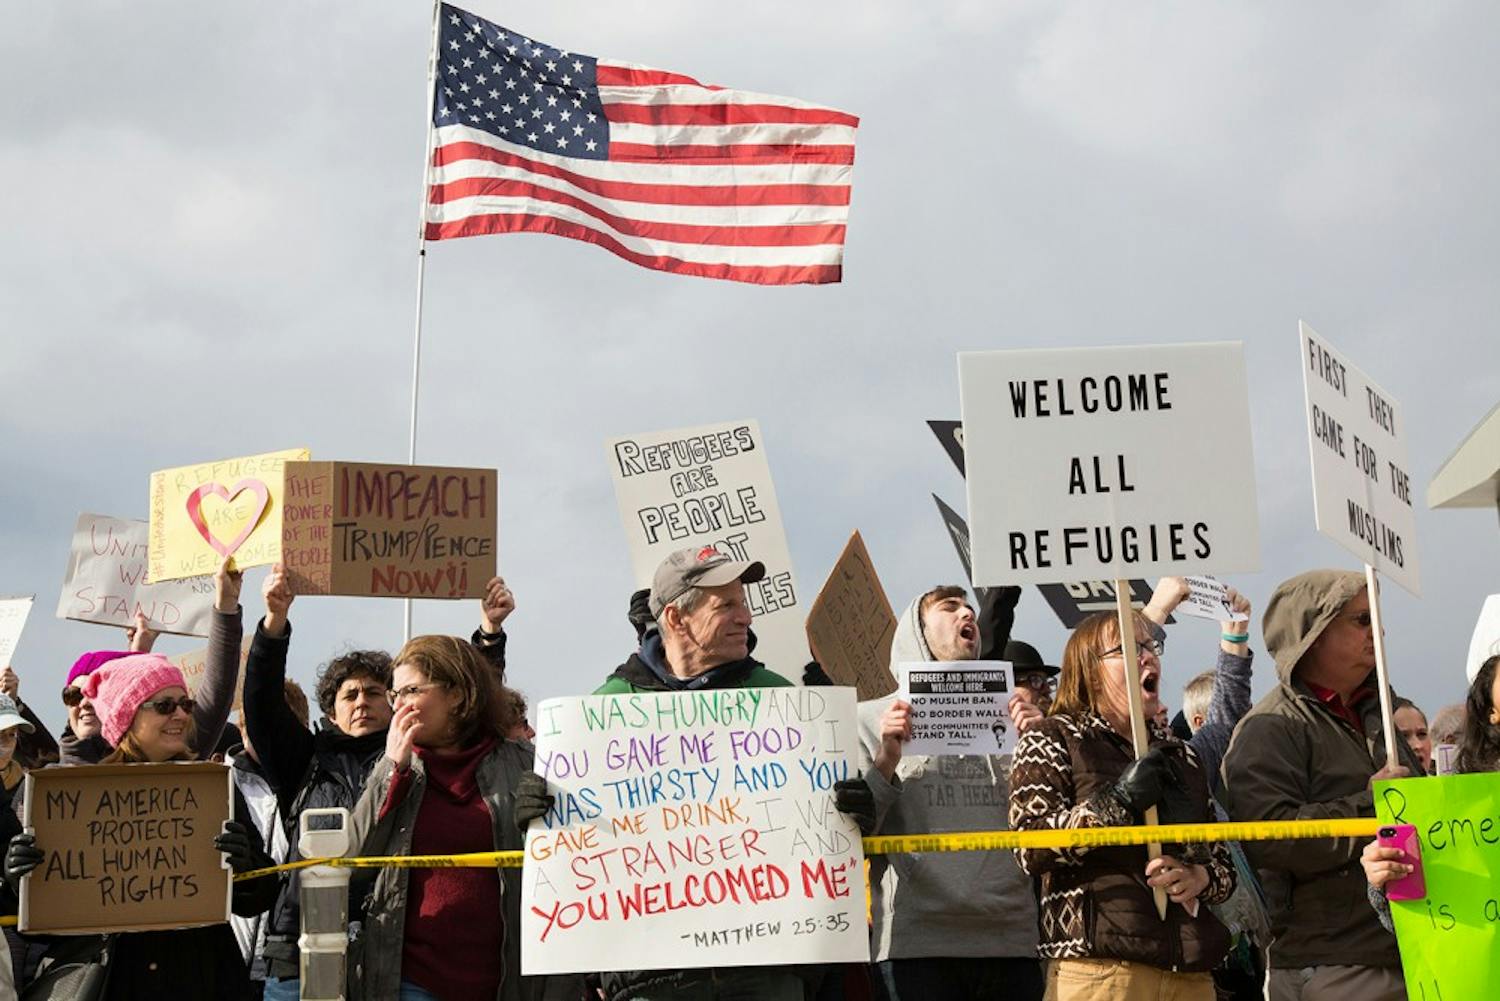 Protesters gather outside terminal two at RDU Airport Sunday in response to President Donald Trump's executive order banning immigrants from certain countries from entering the U.S.